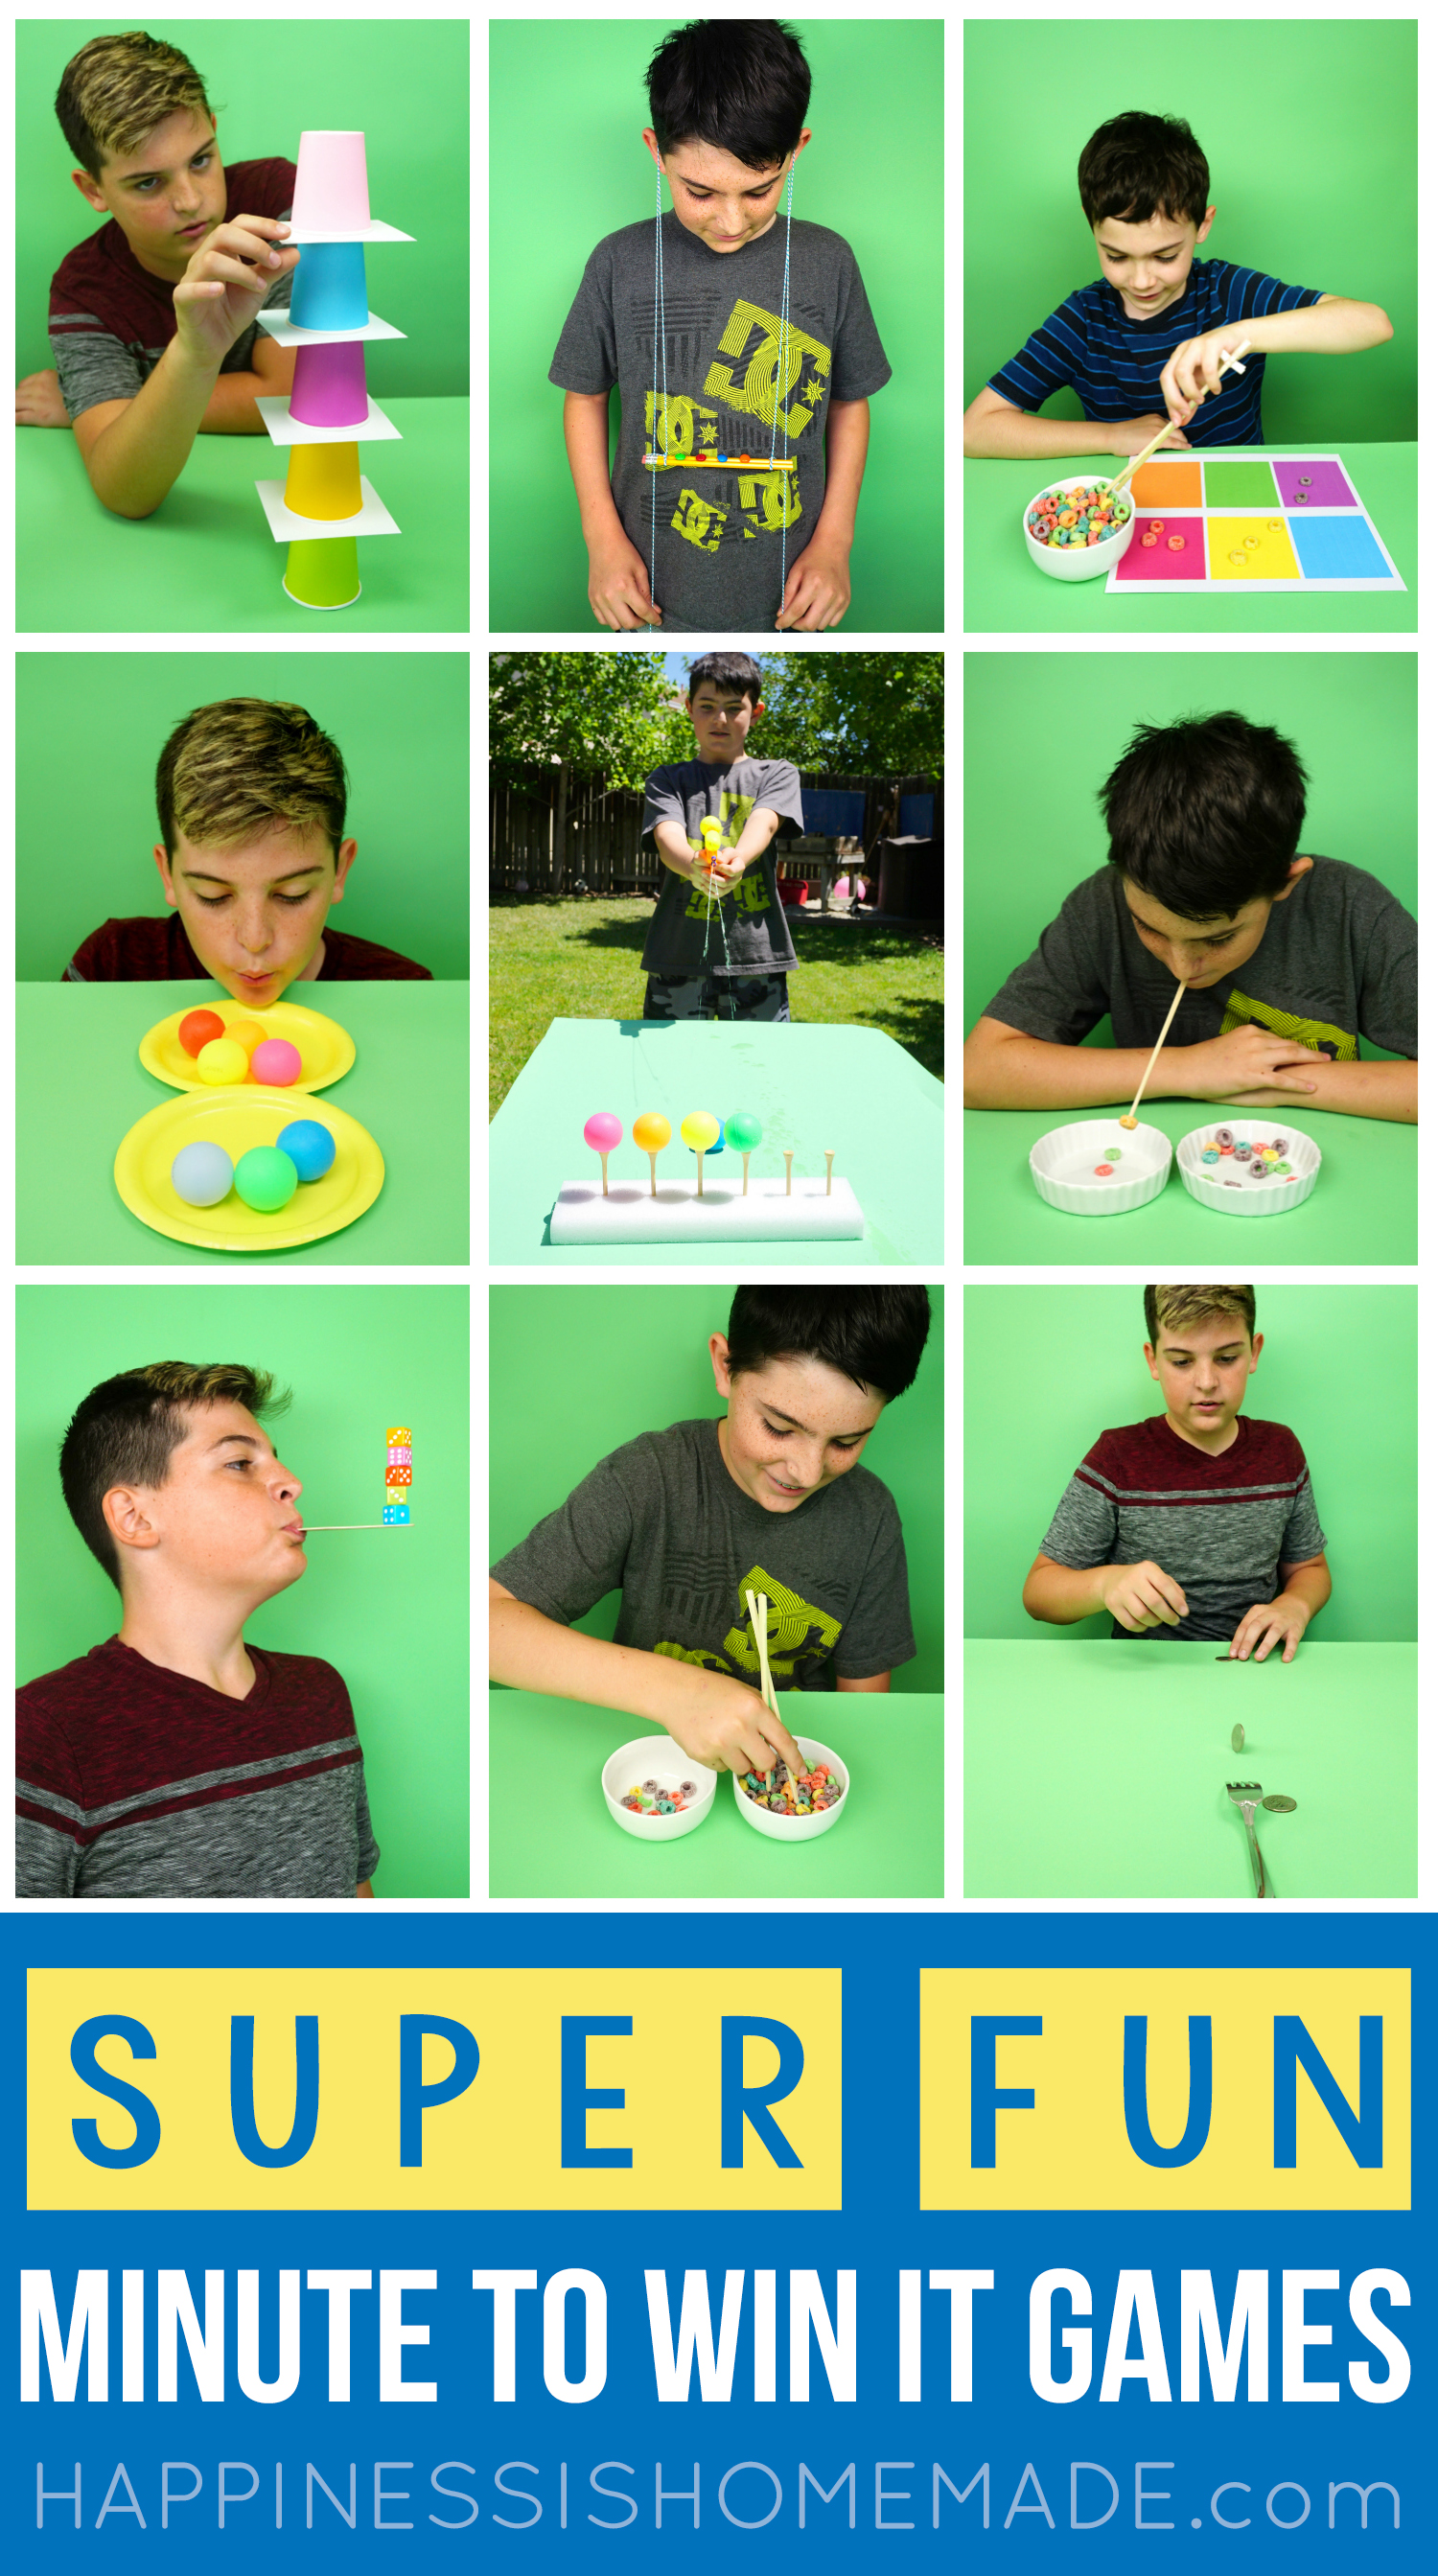 50 Awesome Homemade Games for Kids to Play and Learn - Fun-A-Day!